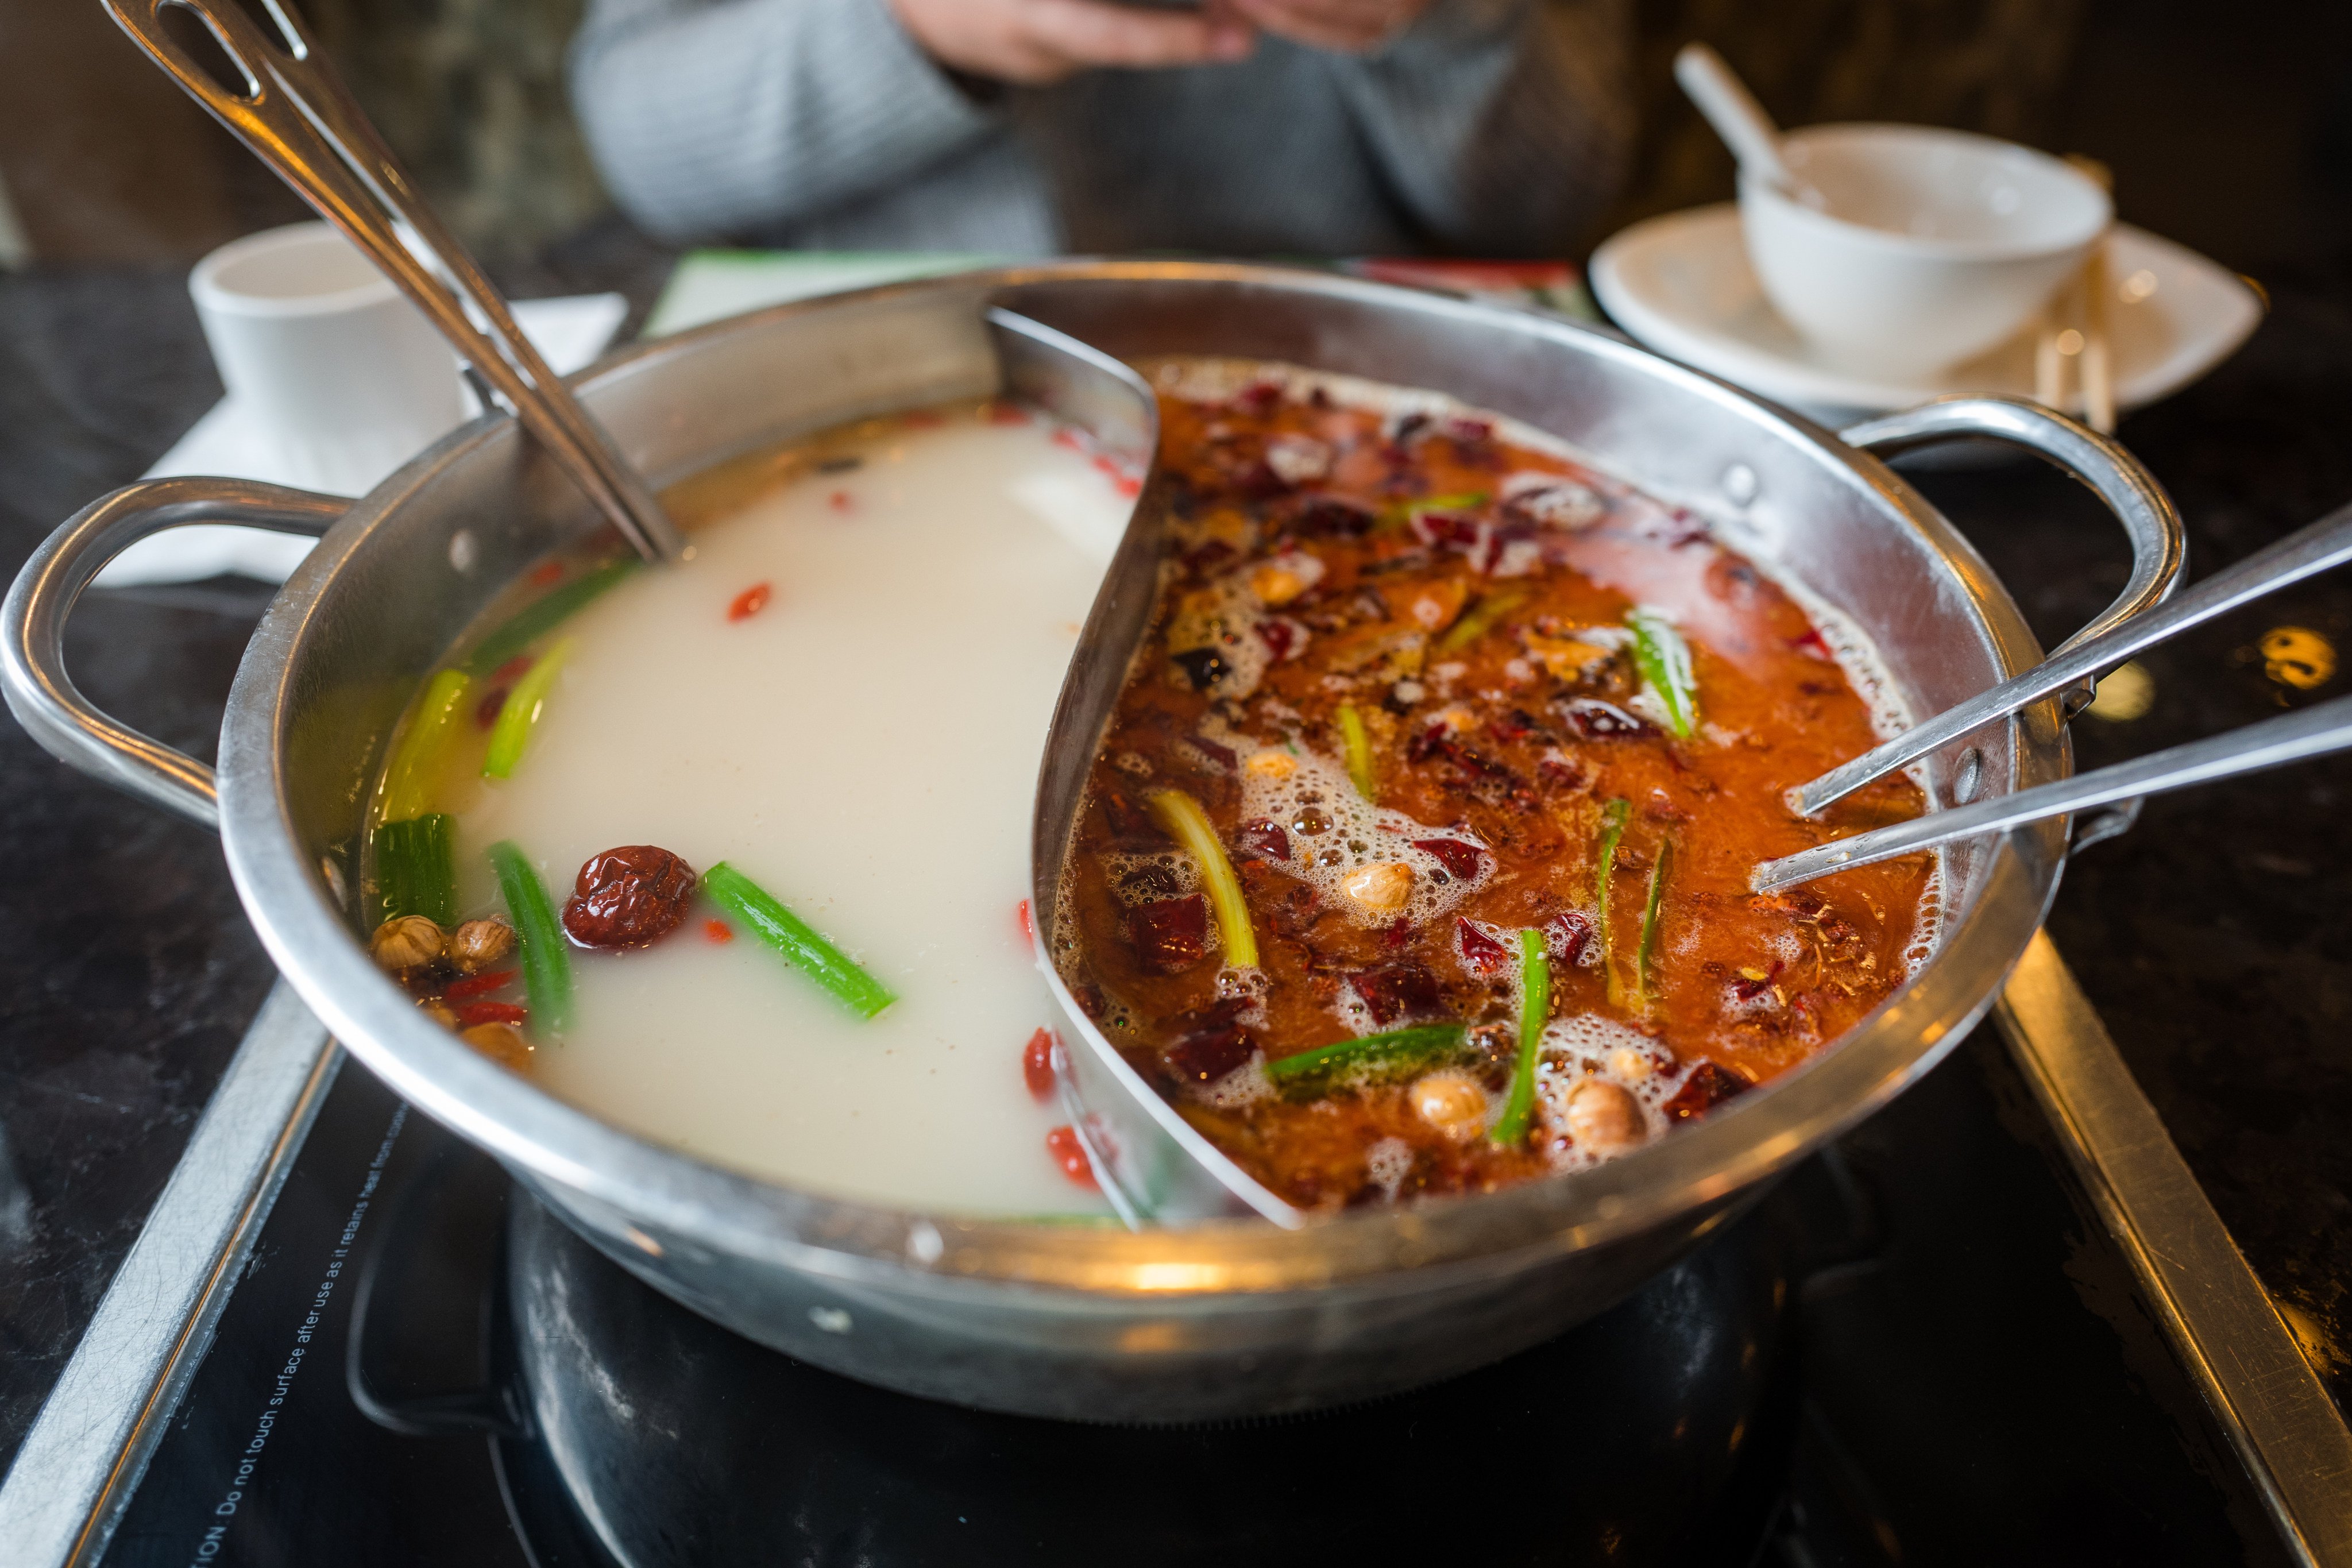 Hong Kong’s hotpot scene is thriving with old and new establishments. Photo: Getty Images